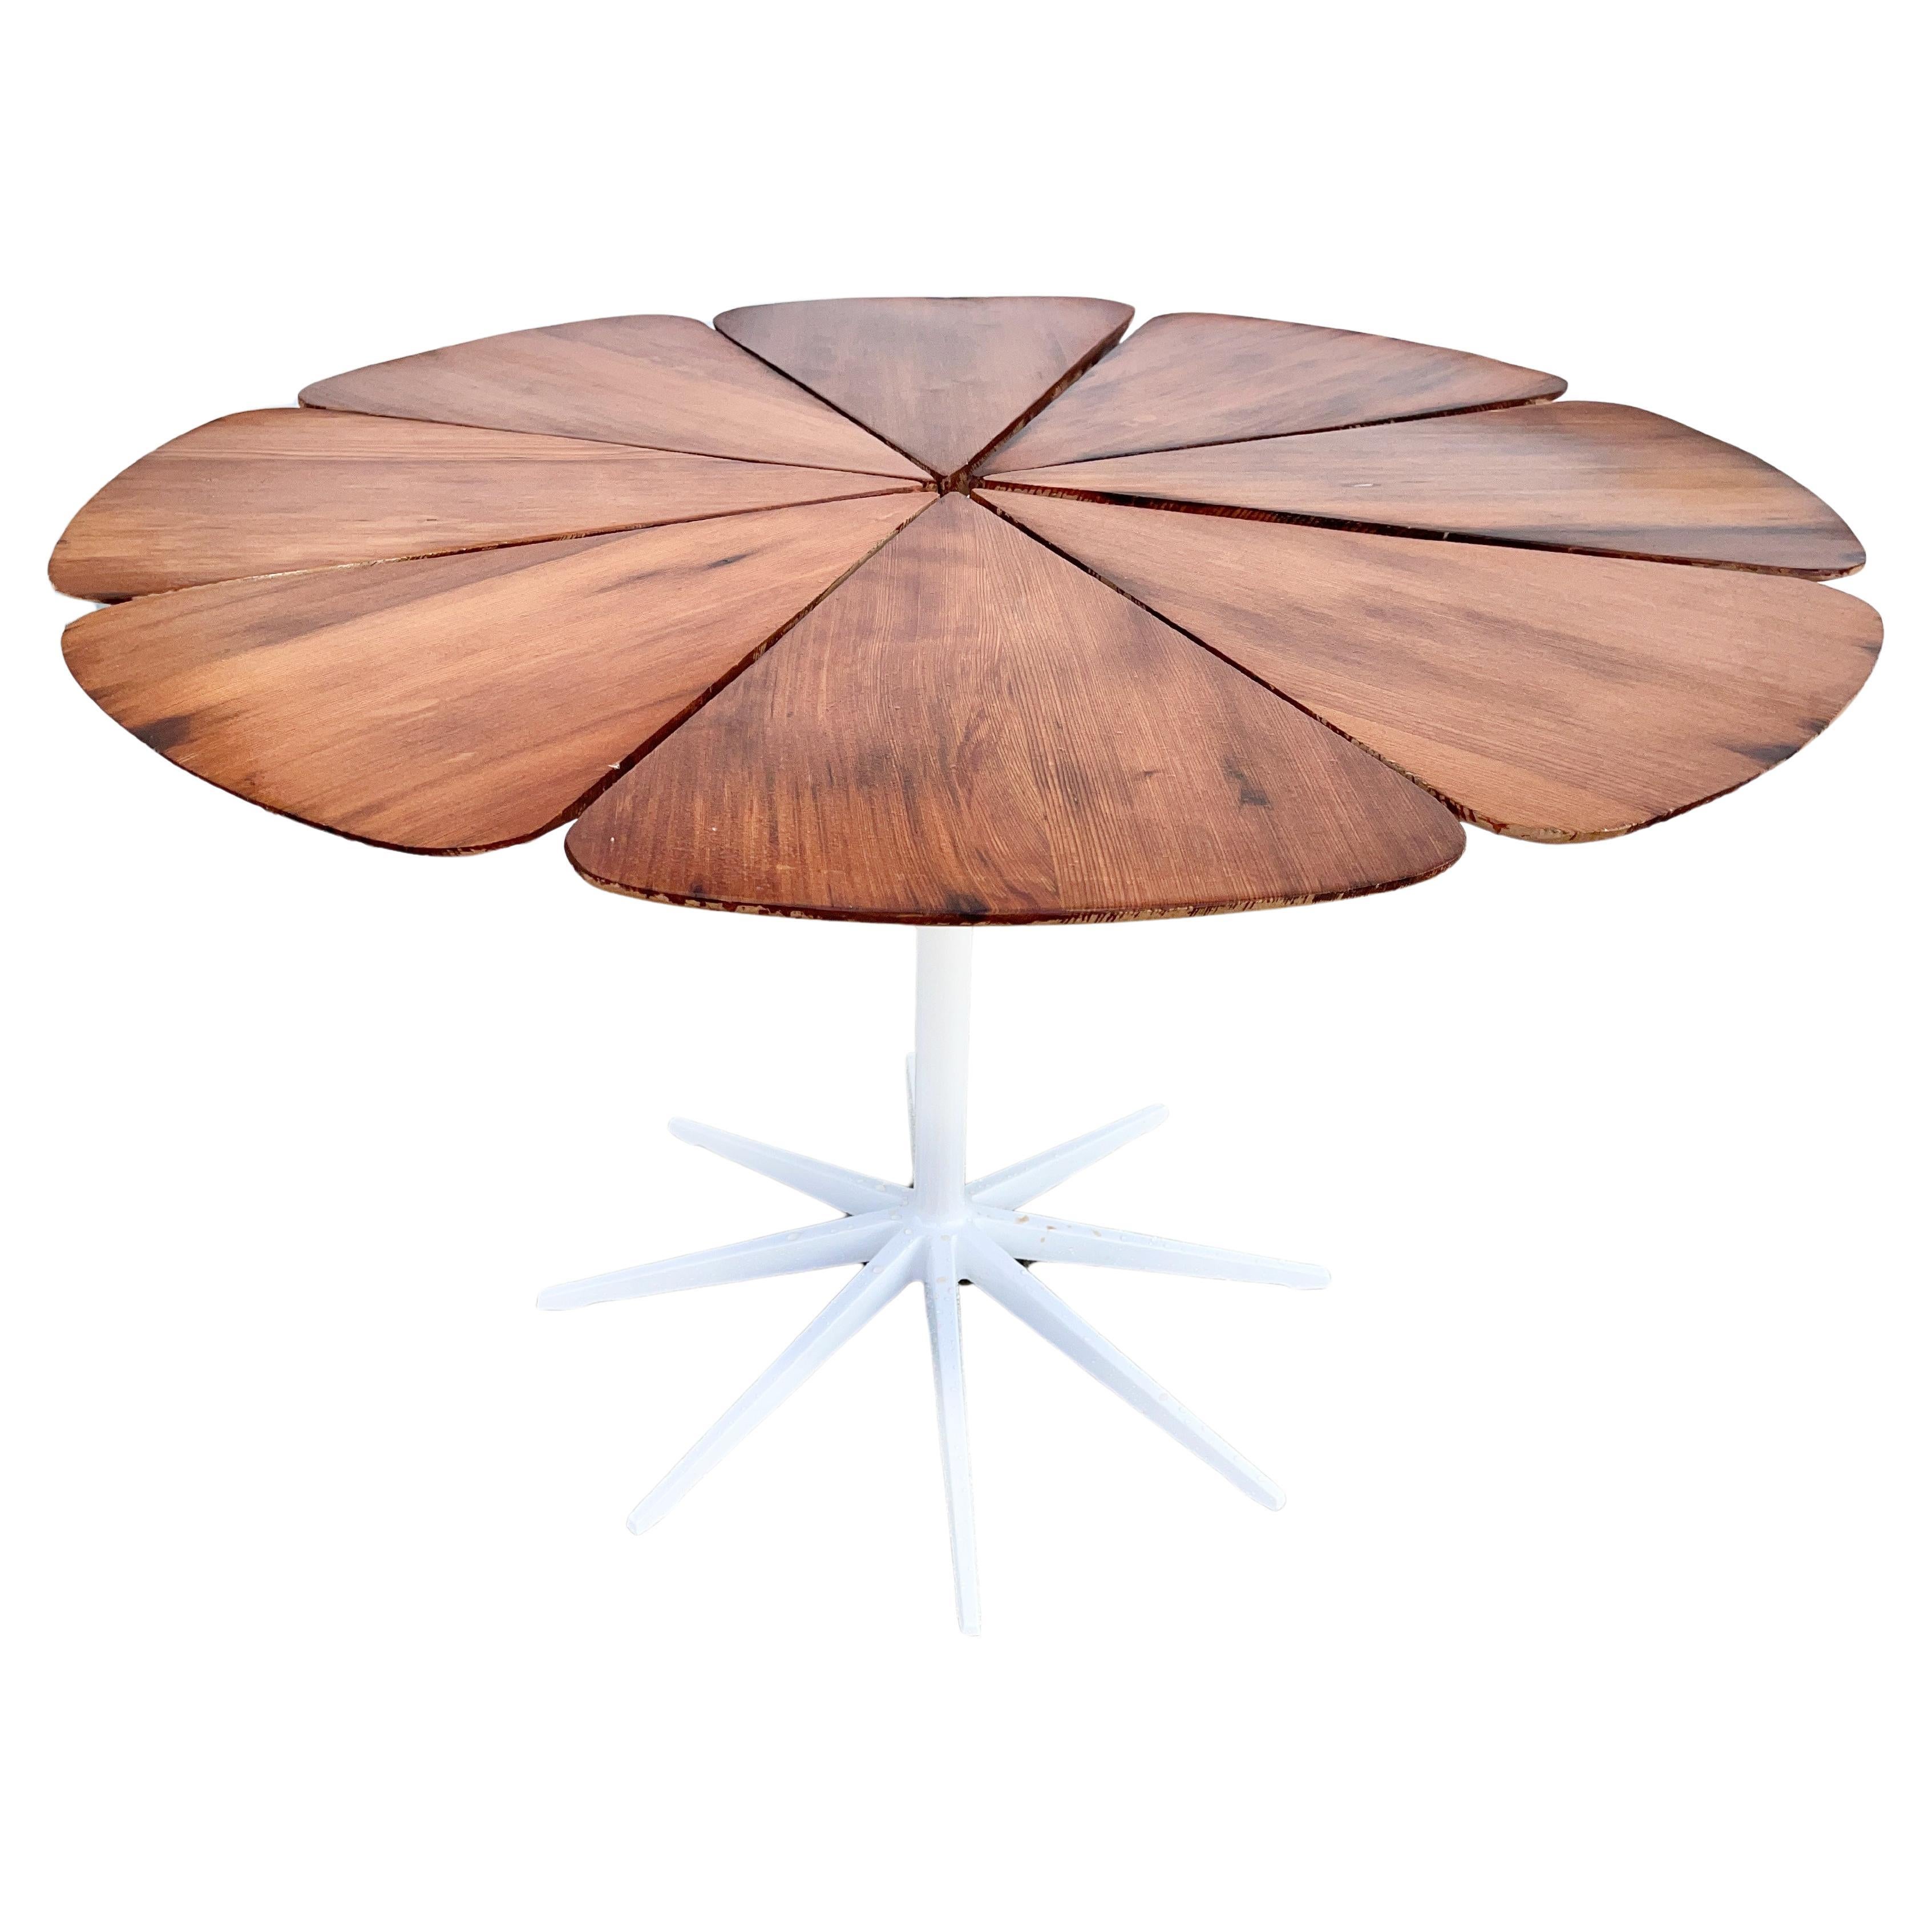 1961 Petal Dining Table by Richard Schultz for Knoll in California Redwood For Sale